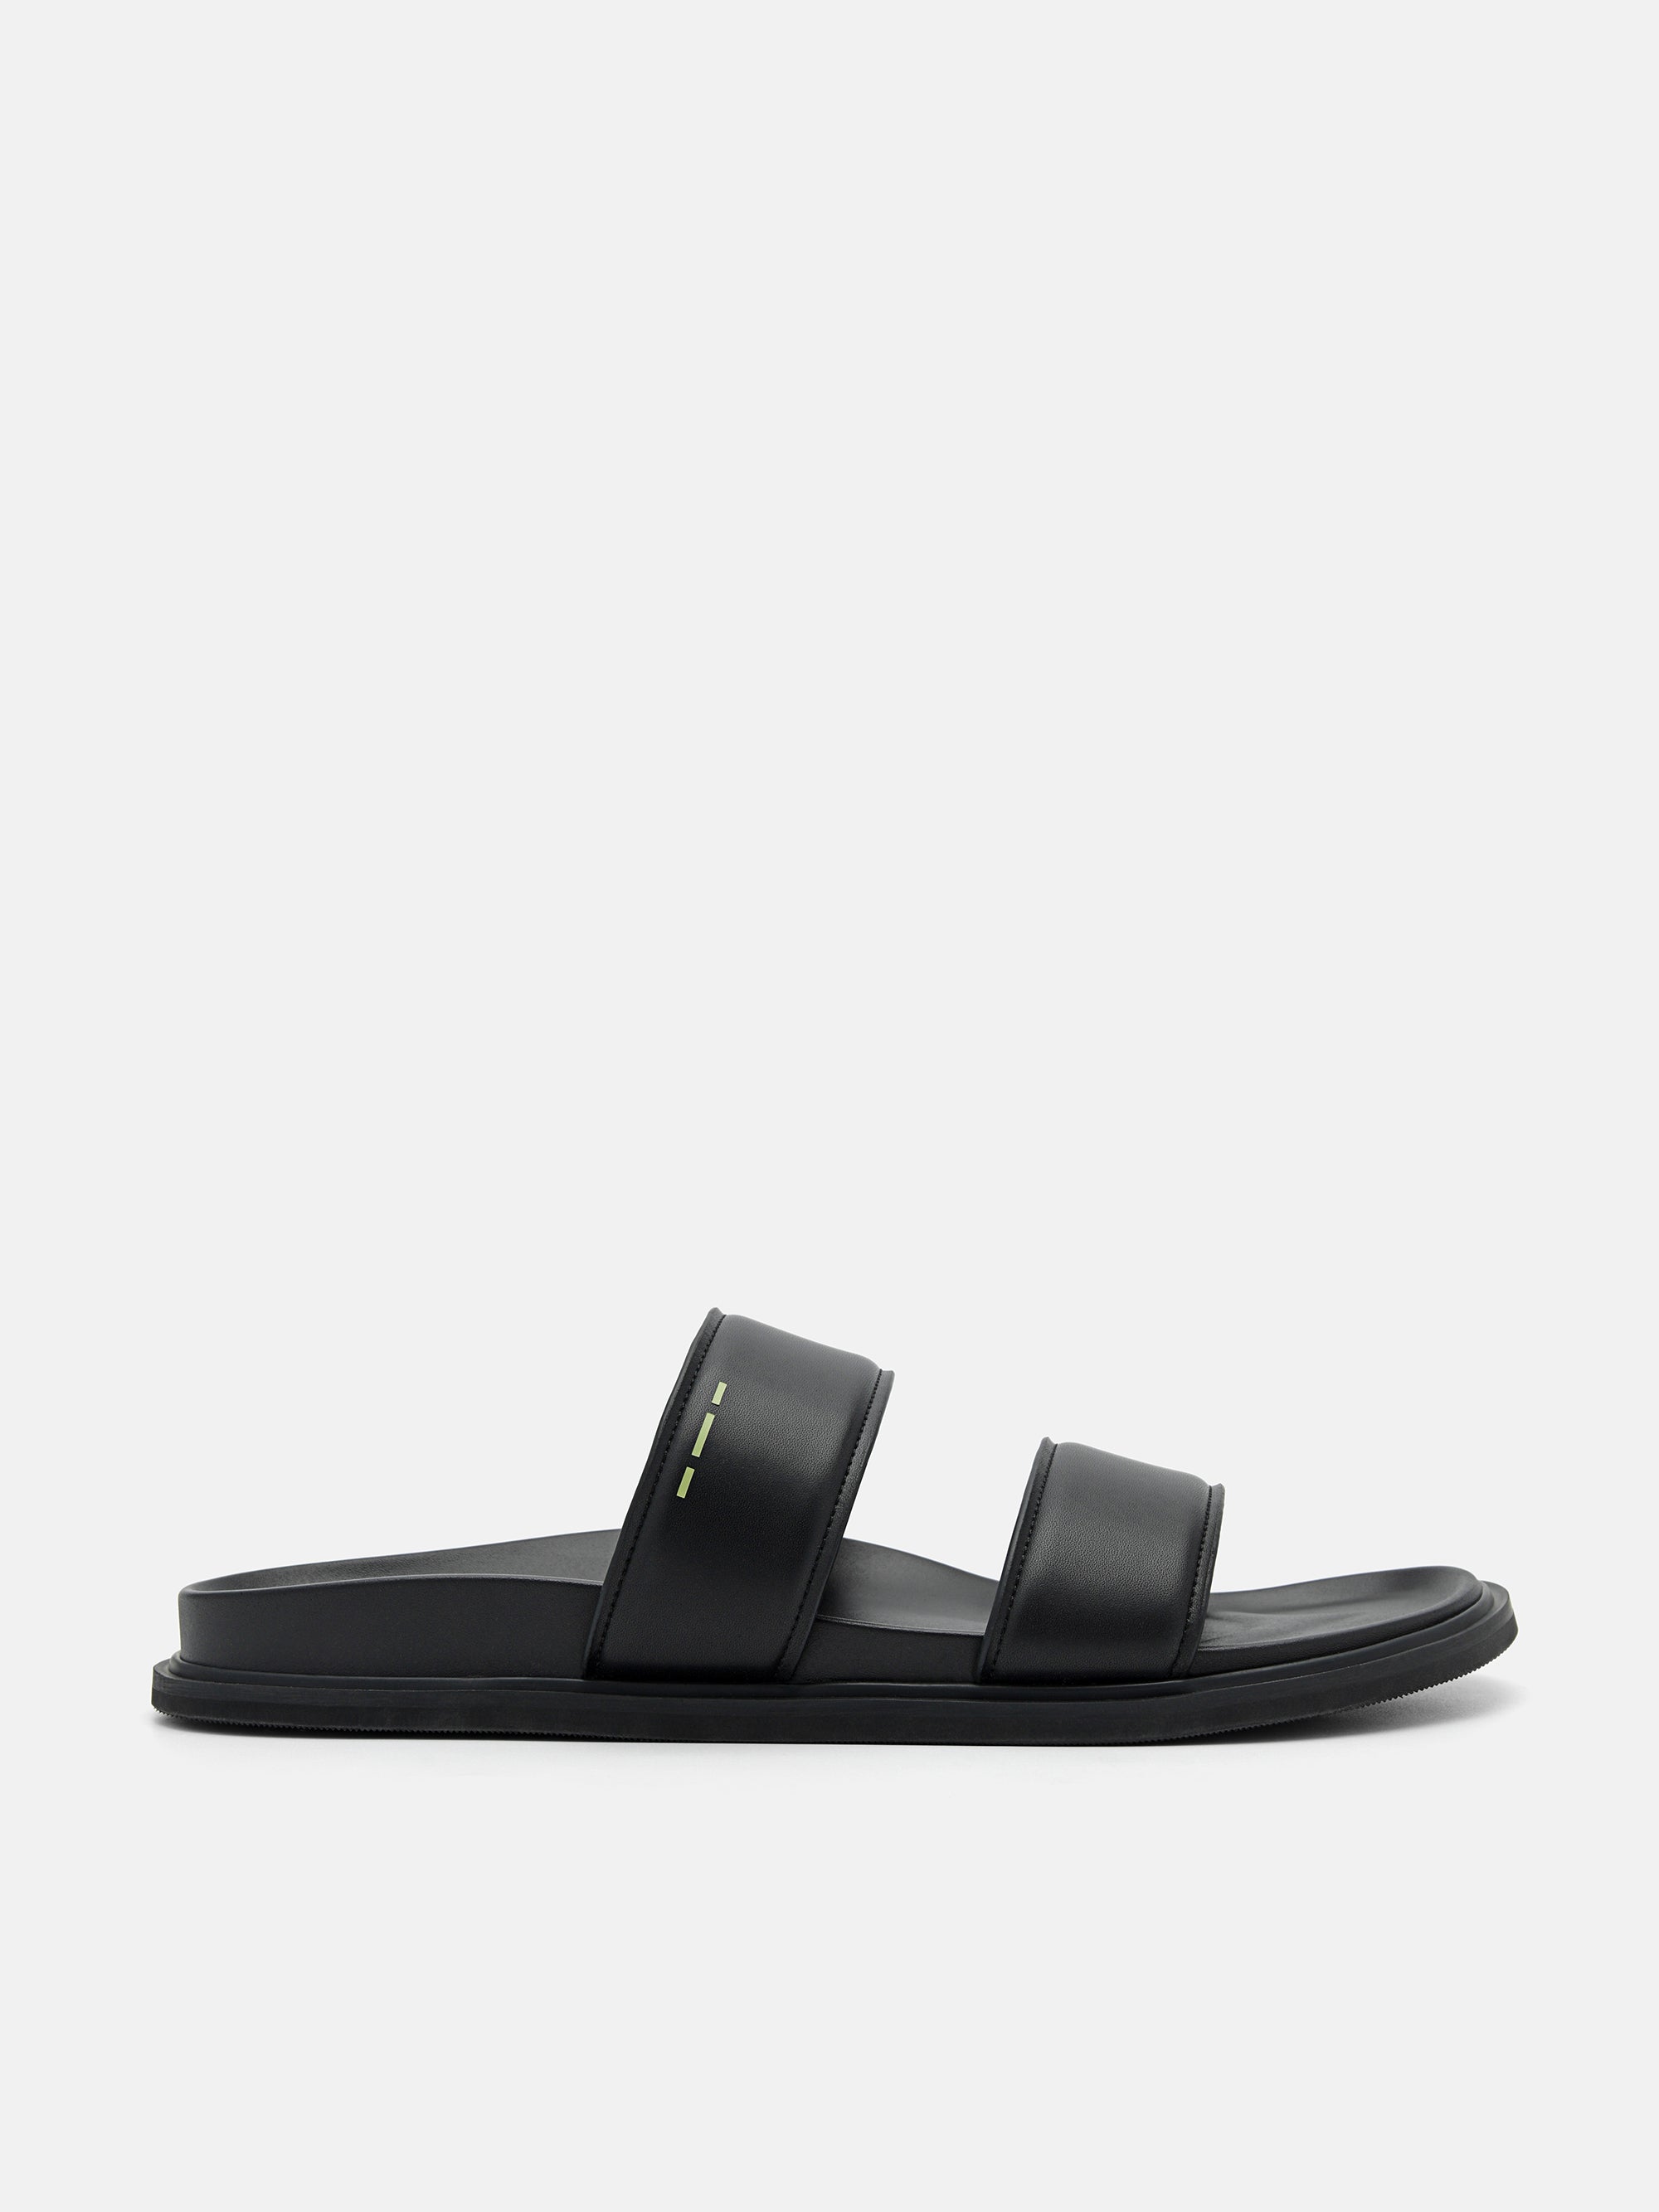 rePEDRO Recycled Leather Slide Sandals